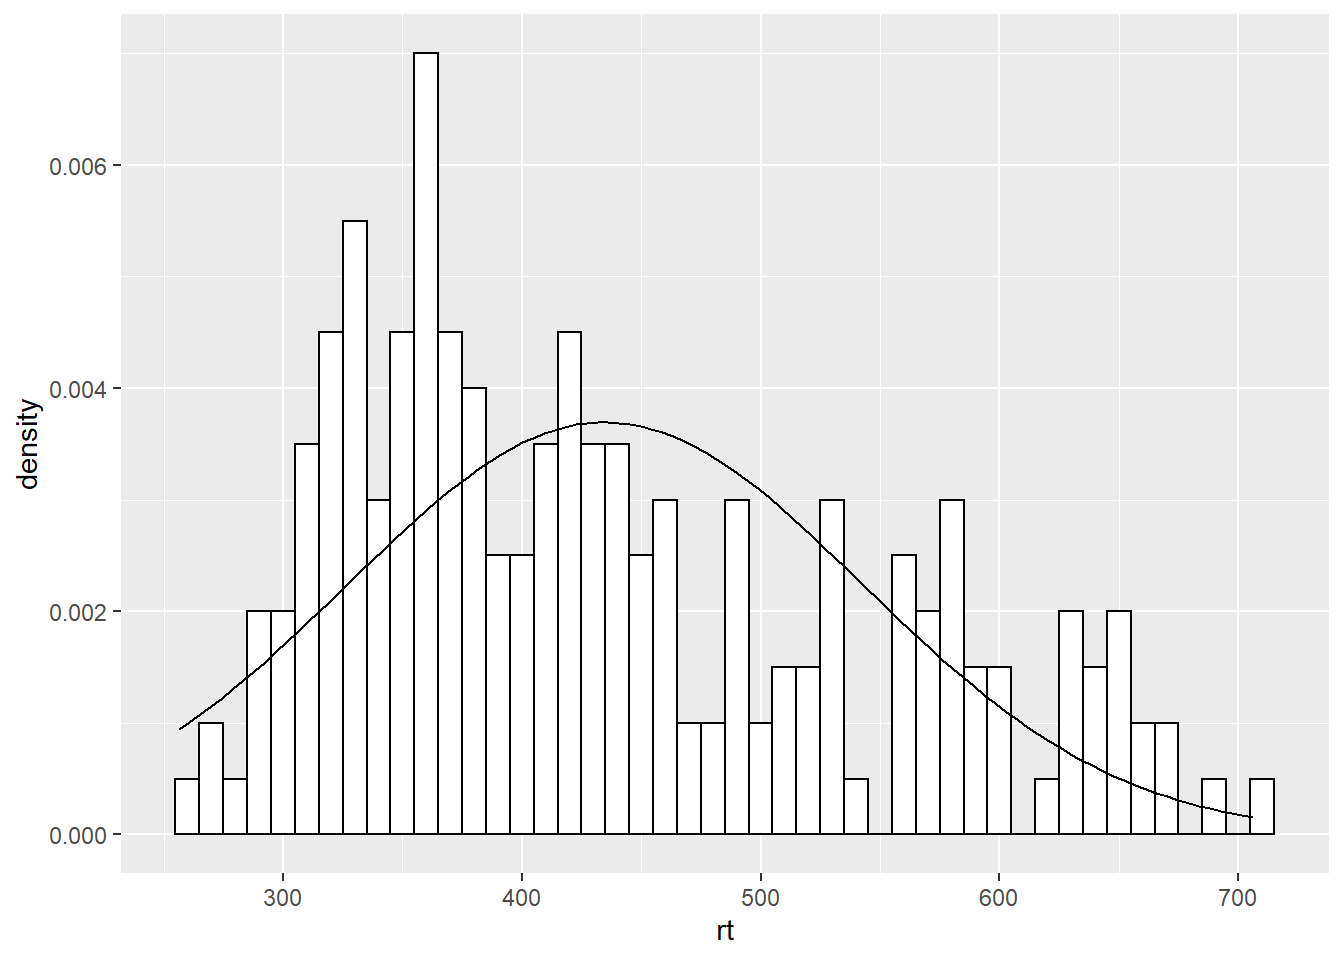 A histogram with normal distribution based on the data overlaid